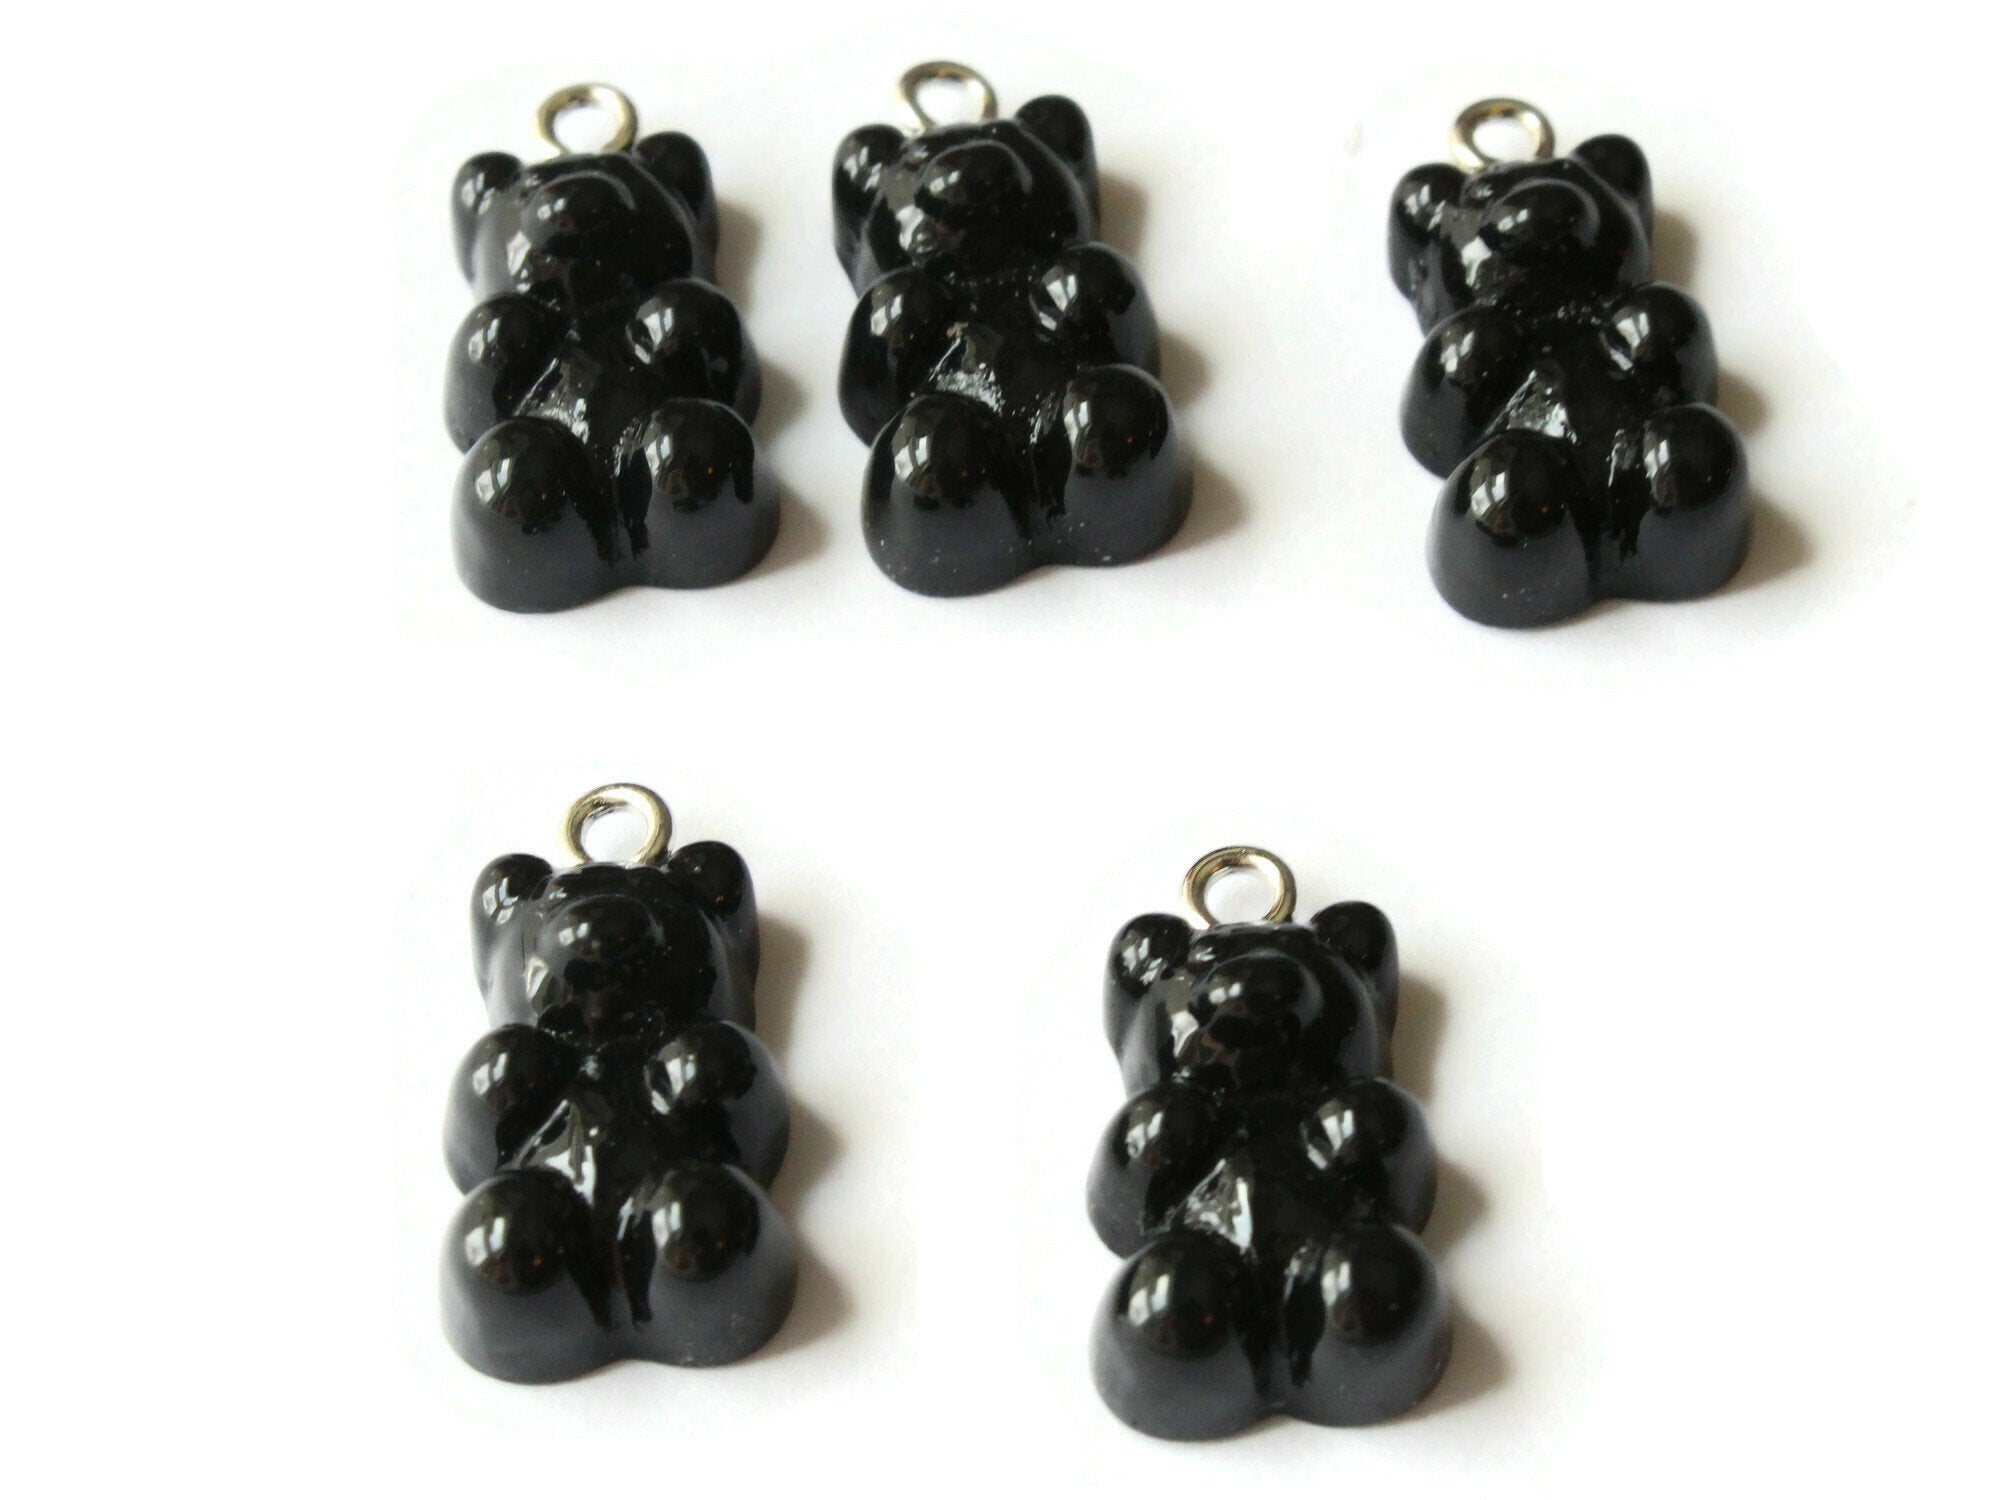 5 20mm Black Resin Gummy Bear Charms by Smileyboy Beads | Michaels